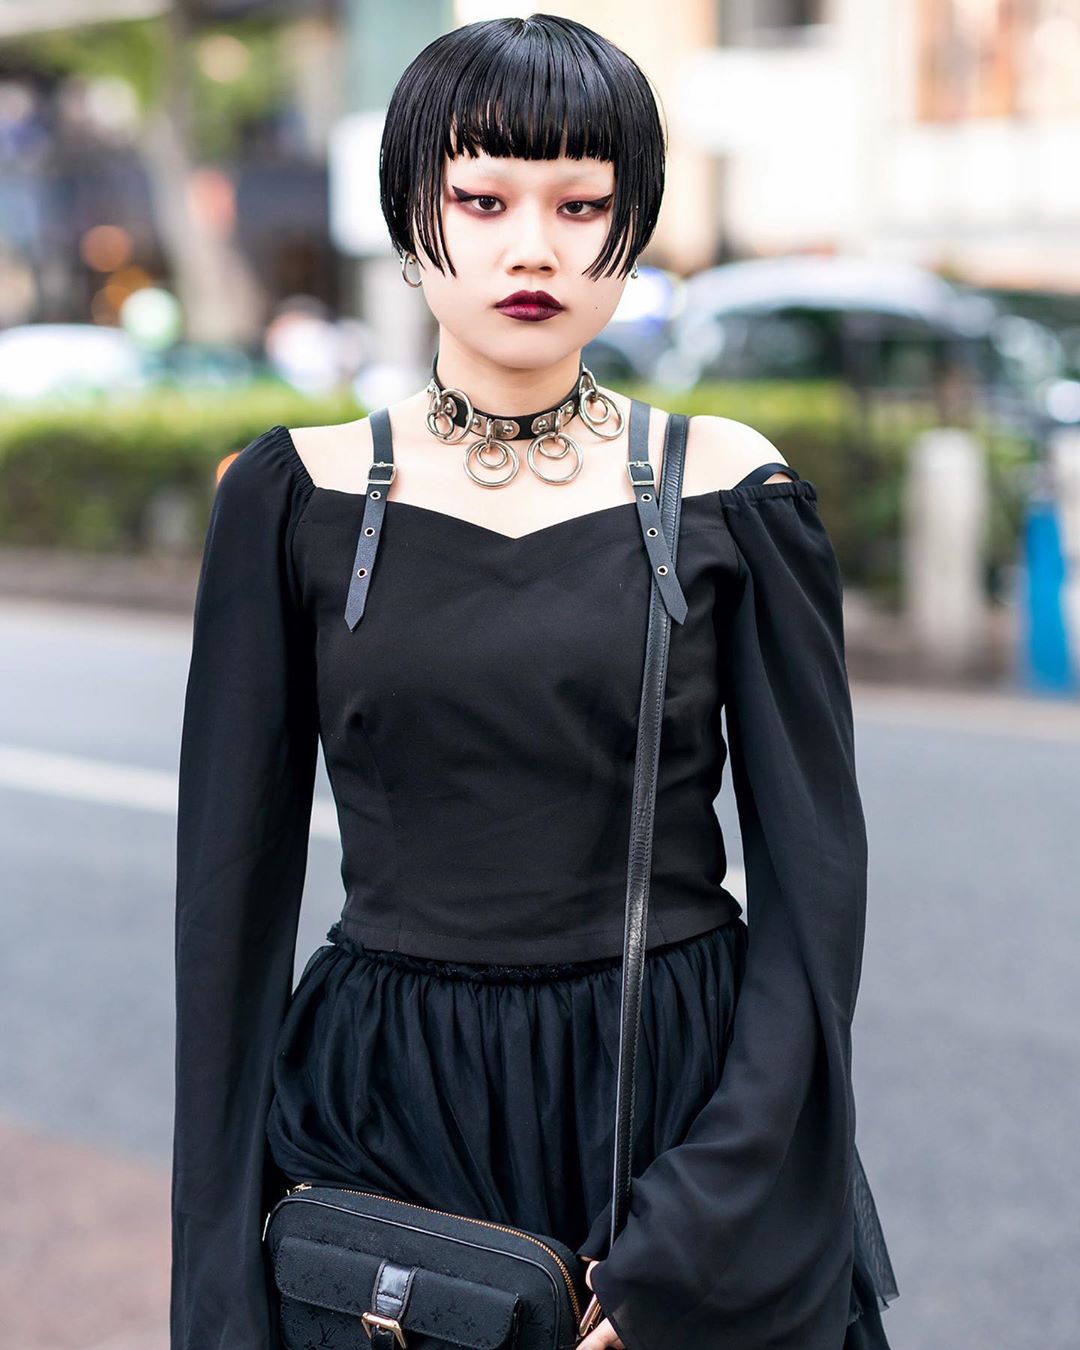 Tokyo Fashion: 19-year-old Japanese student Hana on the street in ...